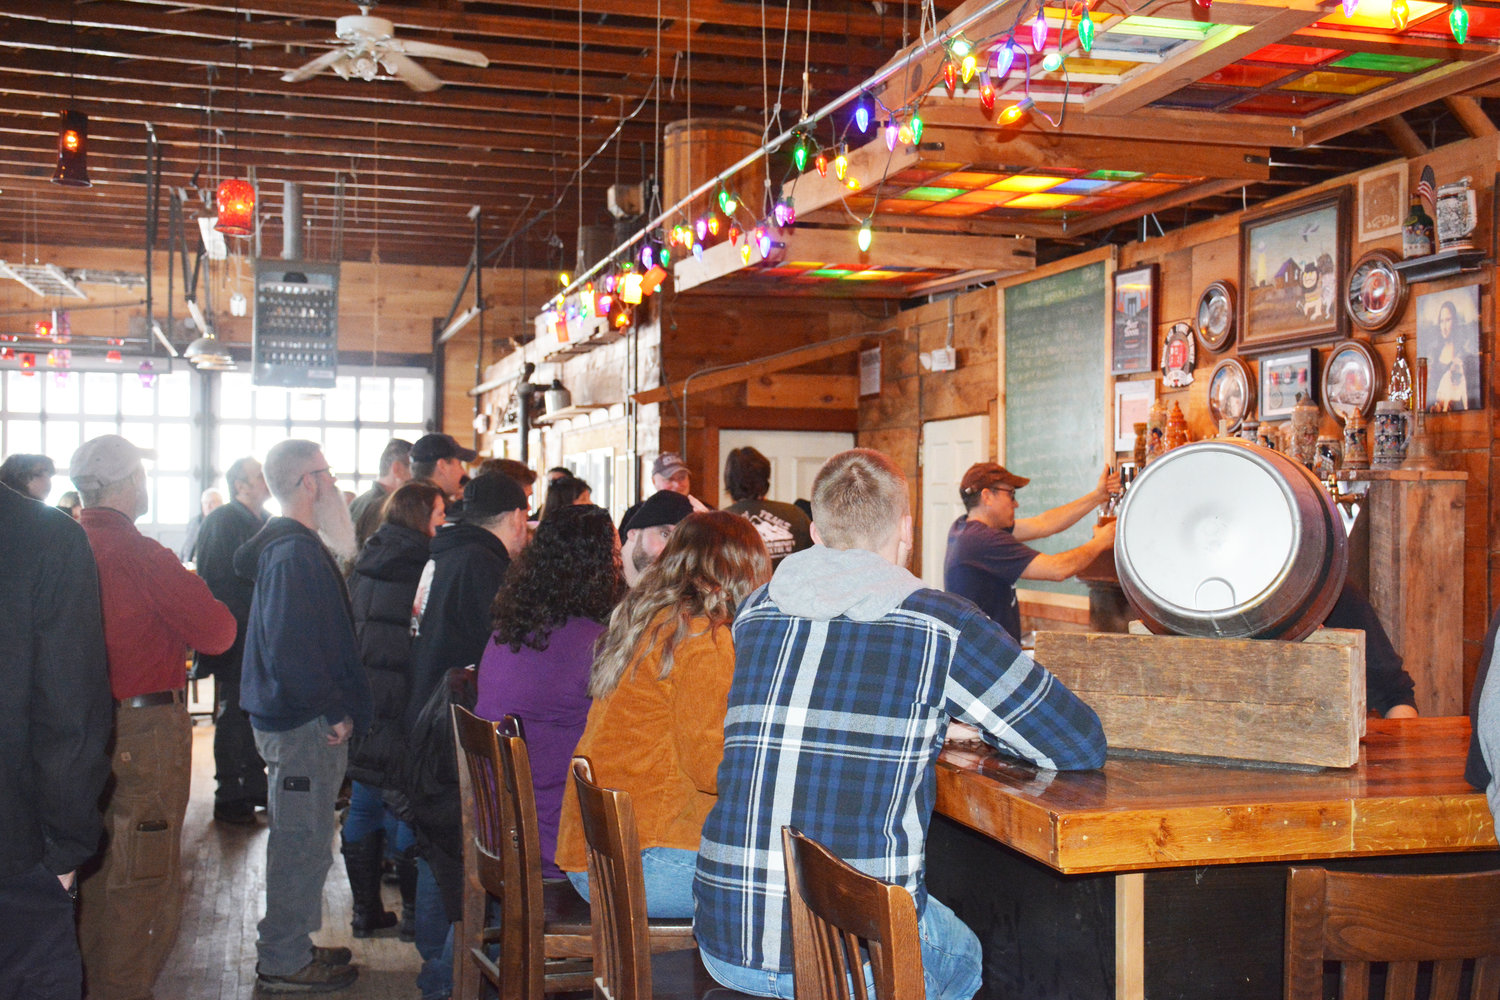 A packed house of community members were eager to try what was on tap at the bar.